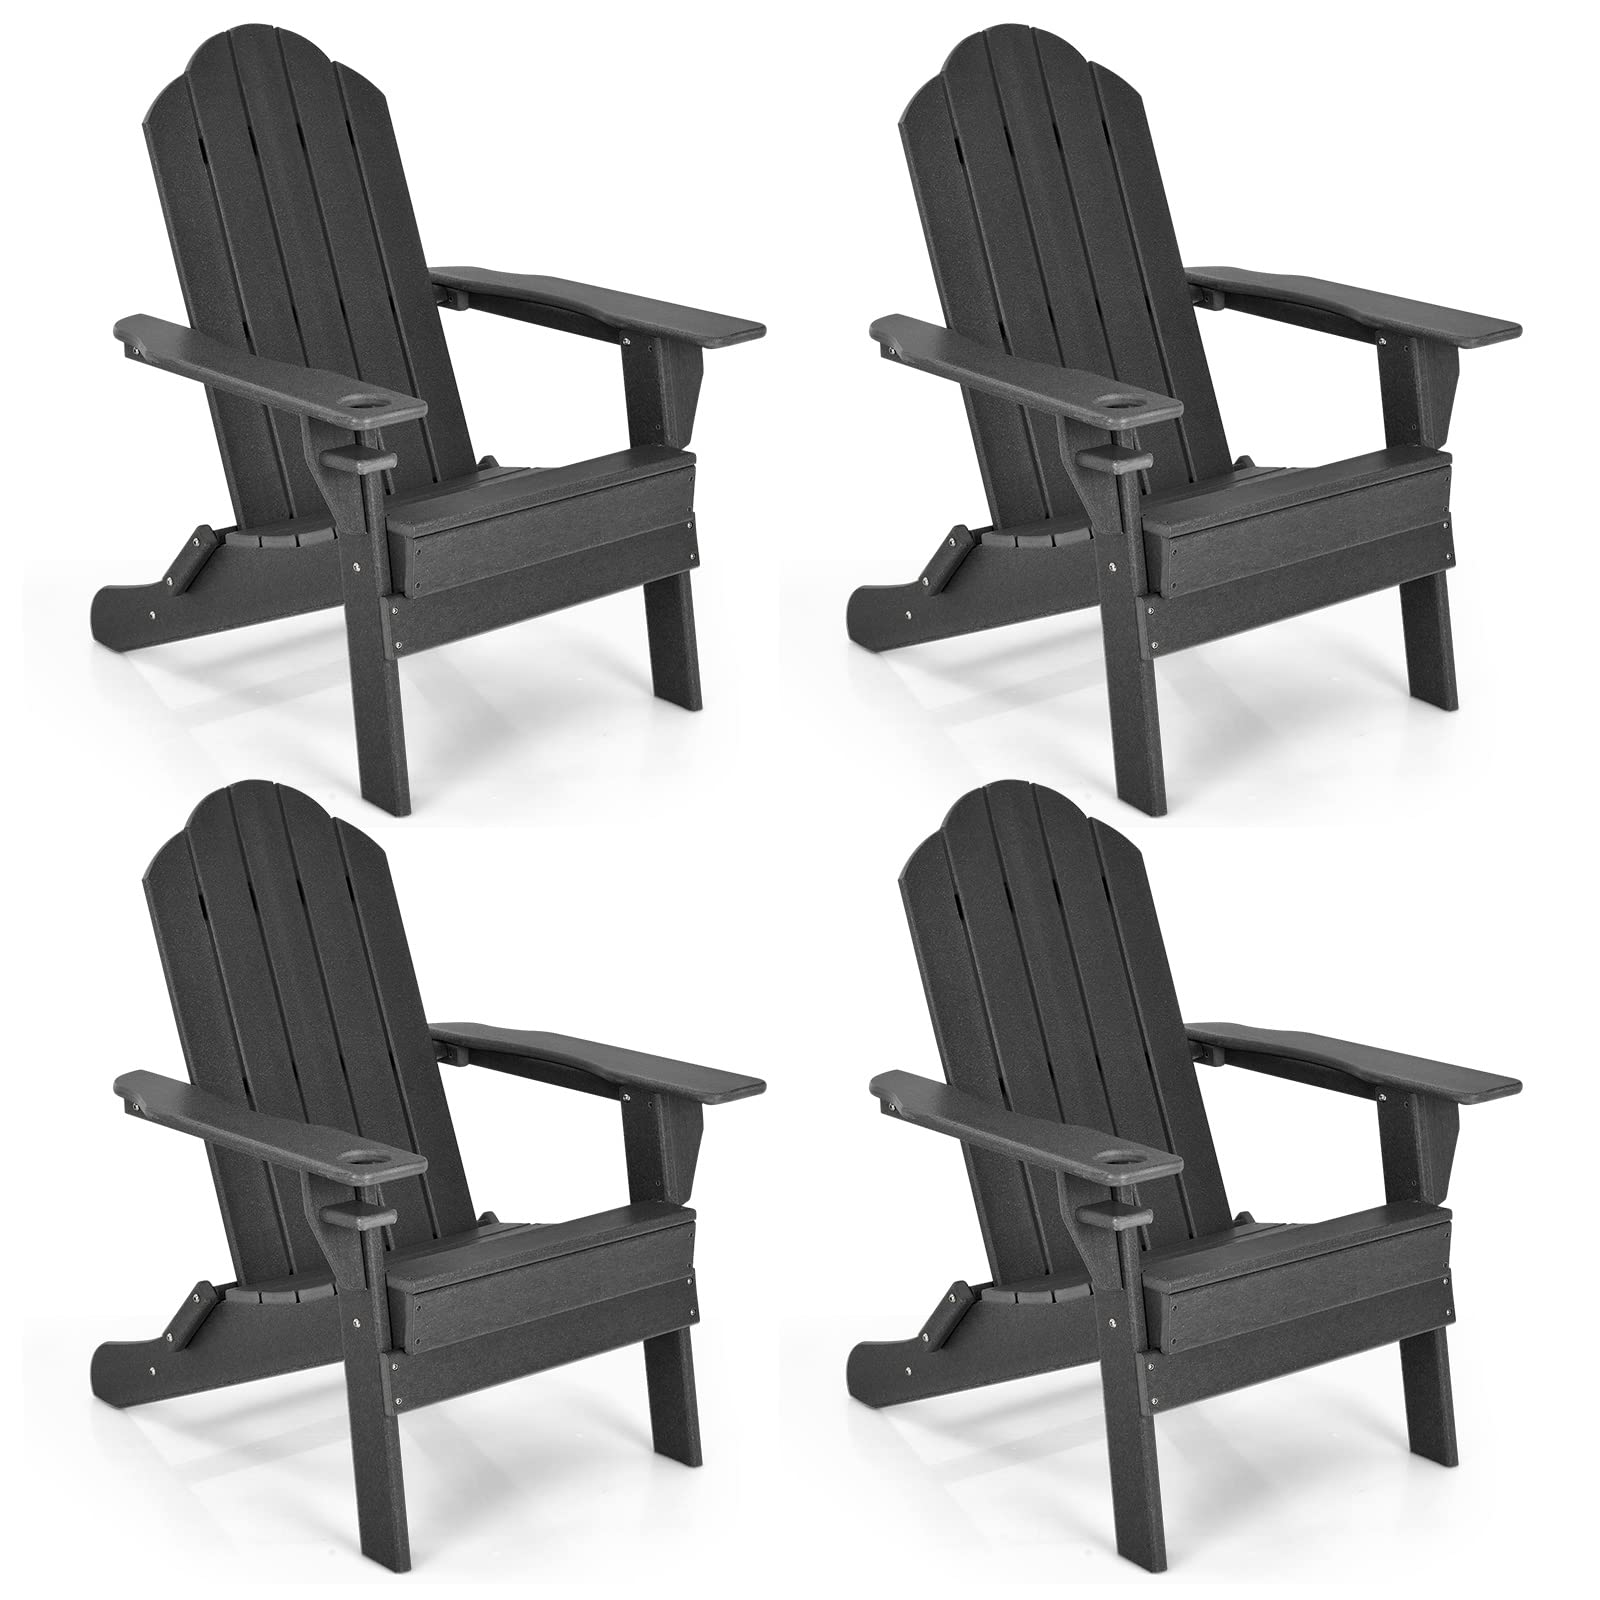 Adirondack Chair with Cup Holder, Outdoor Patio Weather Resistant Chair